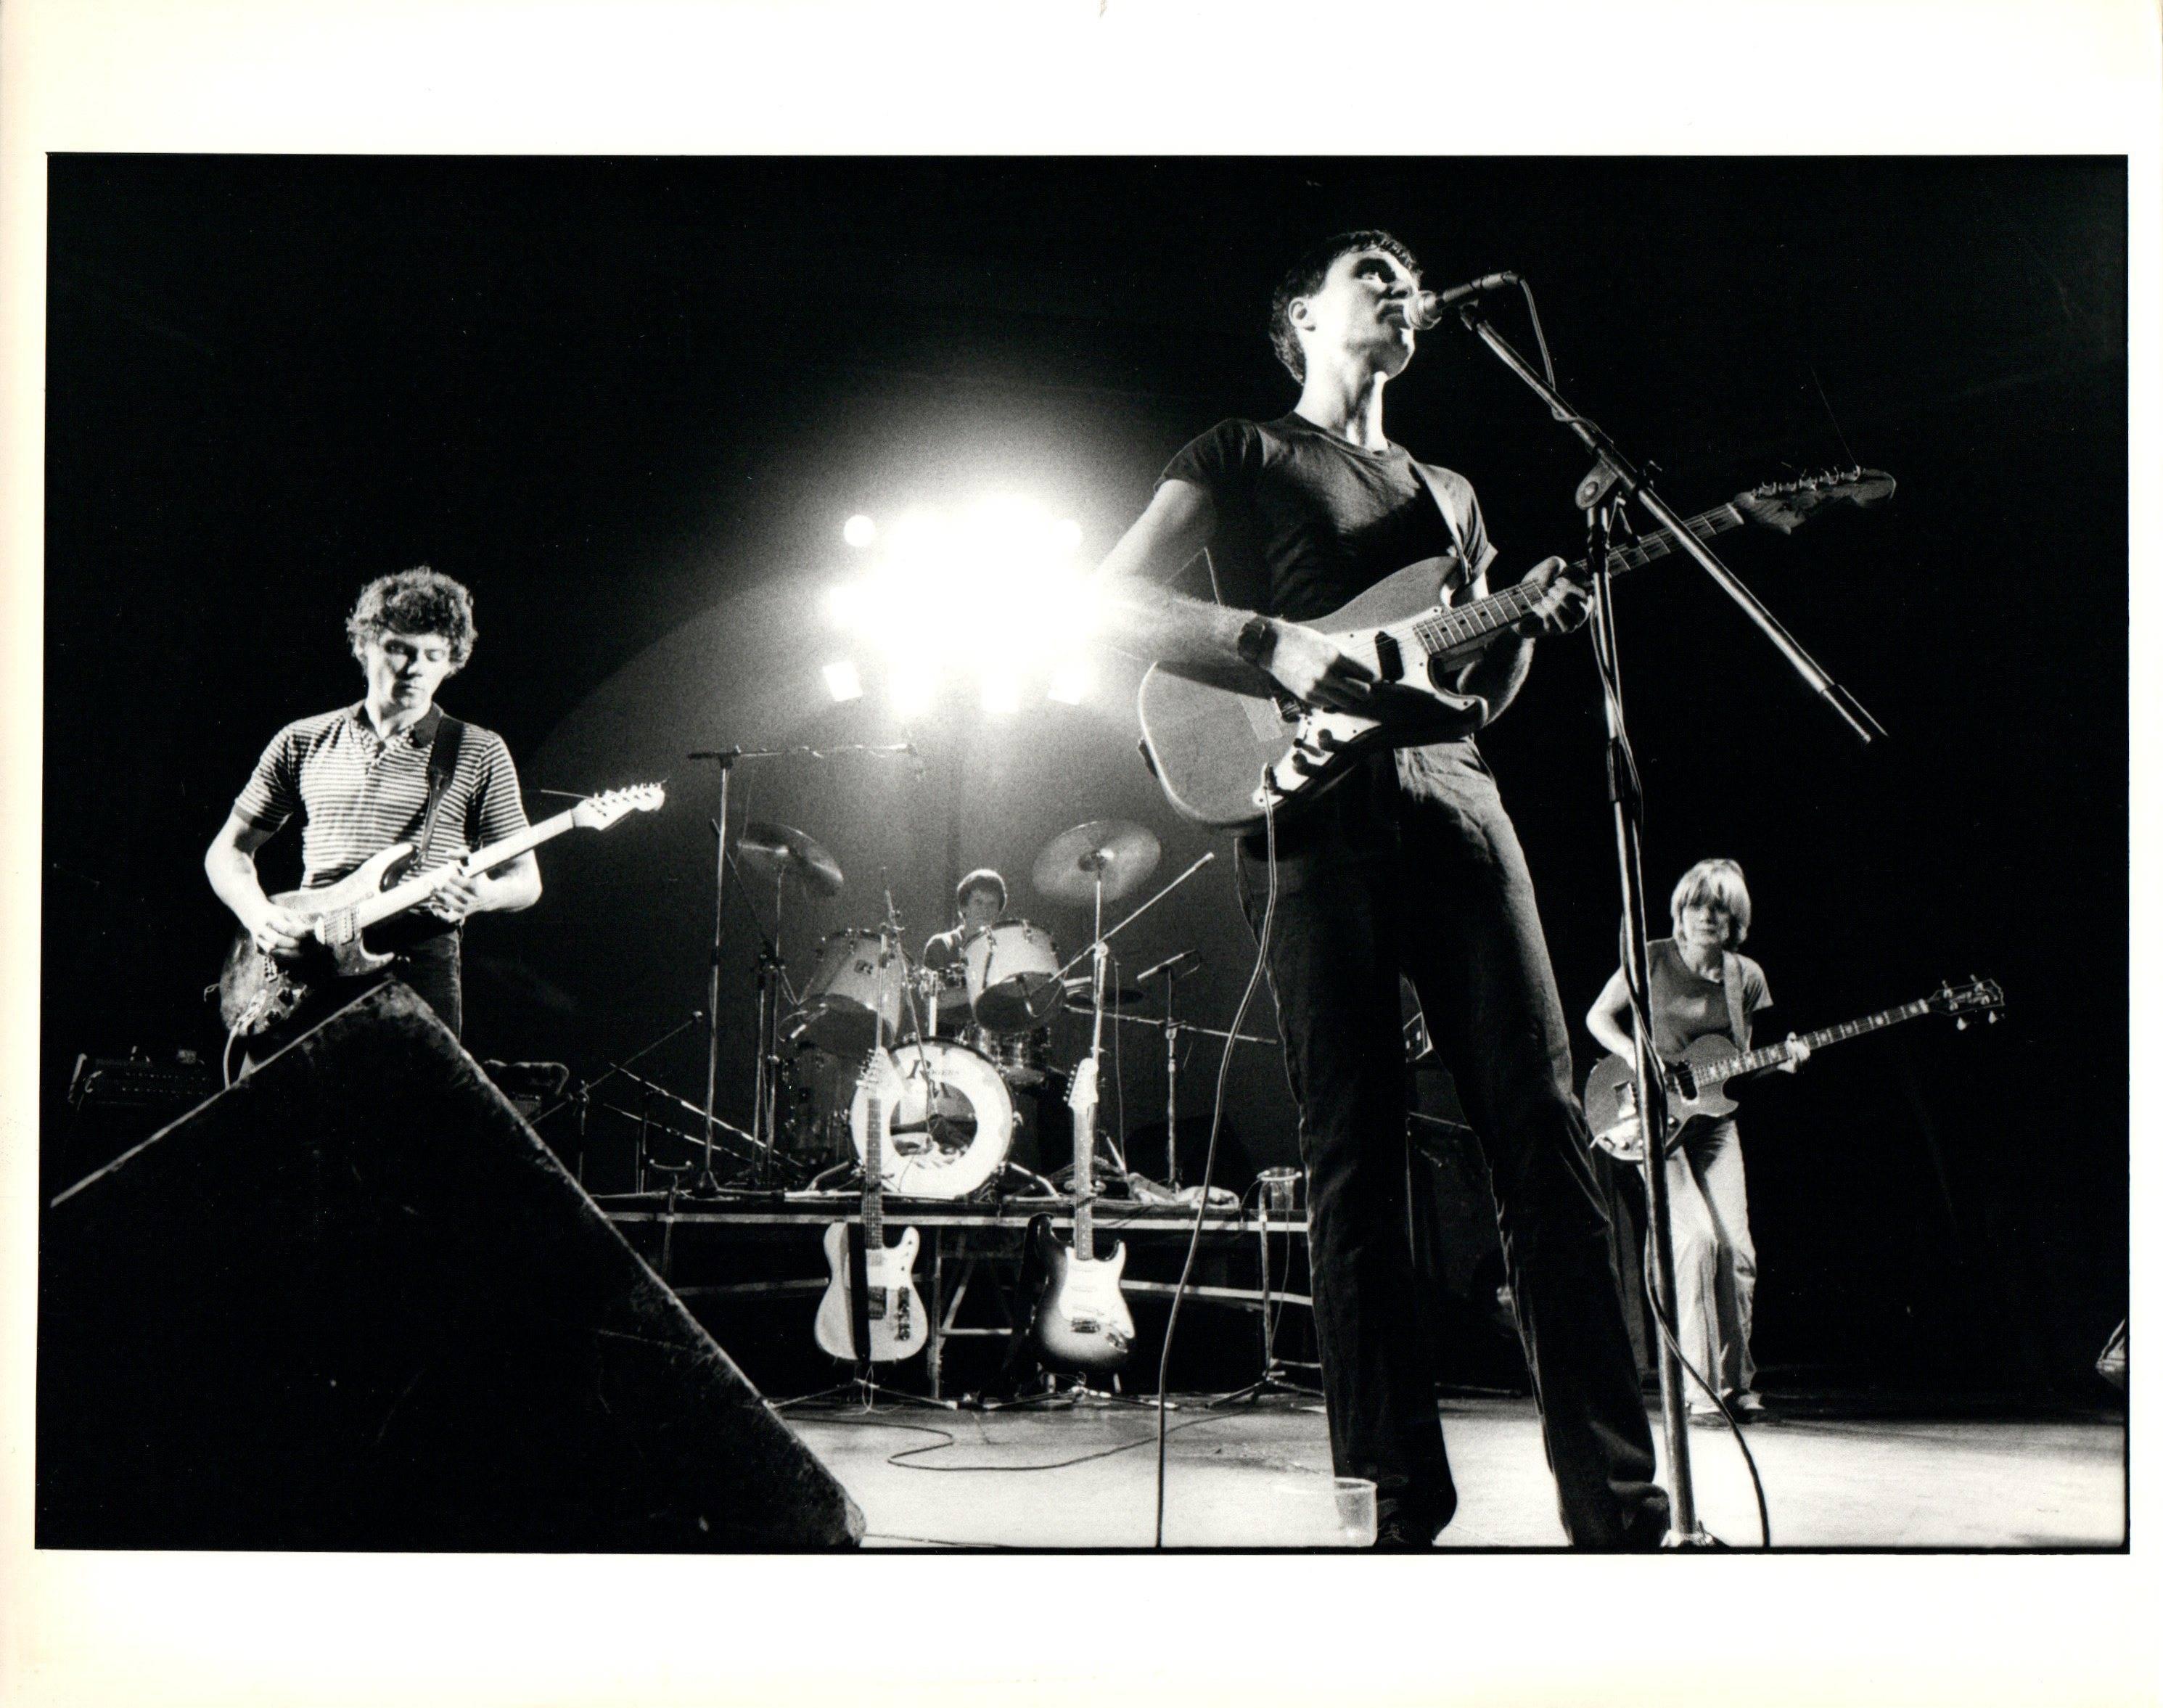 Paul Cox Black and White Photograph - Talking Heads Performing on Stage Vintage Original Photograph